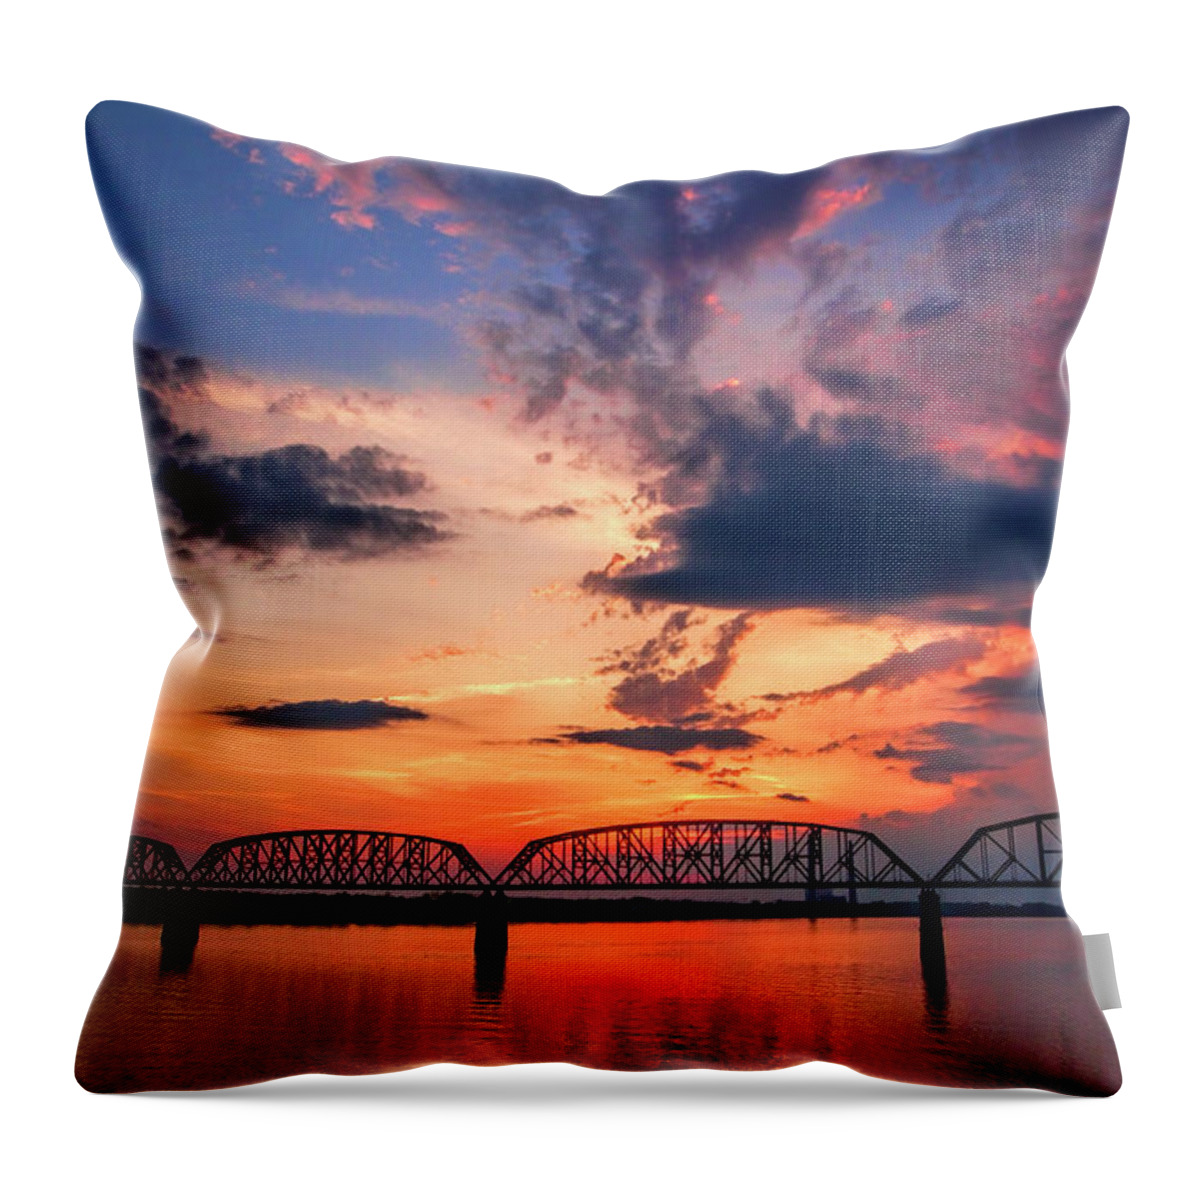 Ohio River Throw Pillow featuring the photograph Ohio River Sunset by Diana Powell